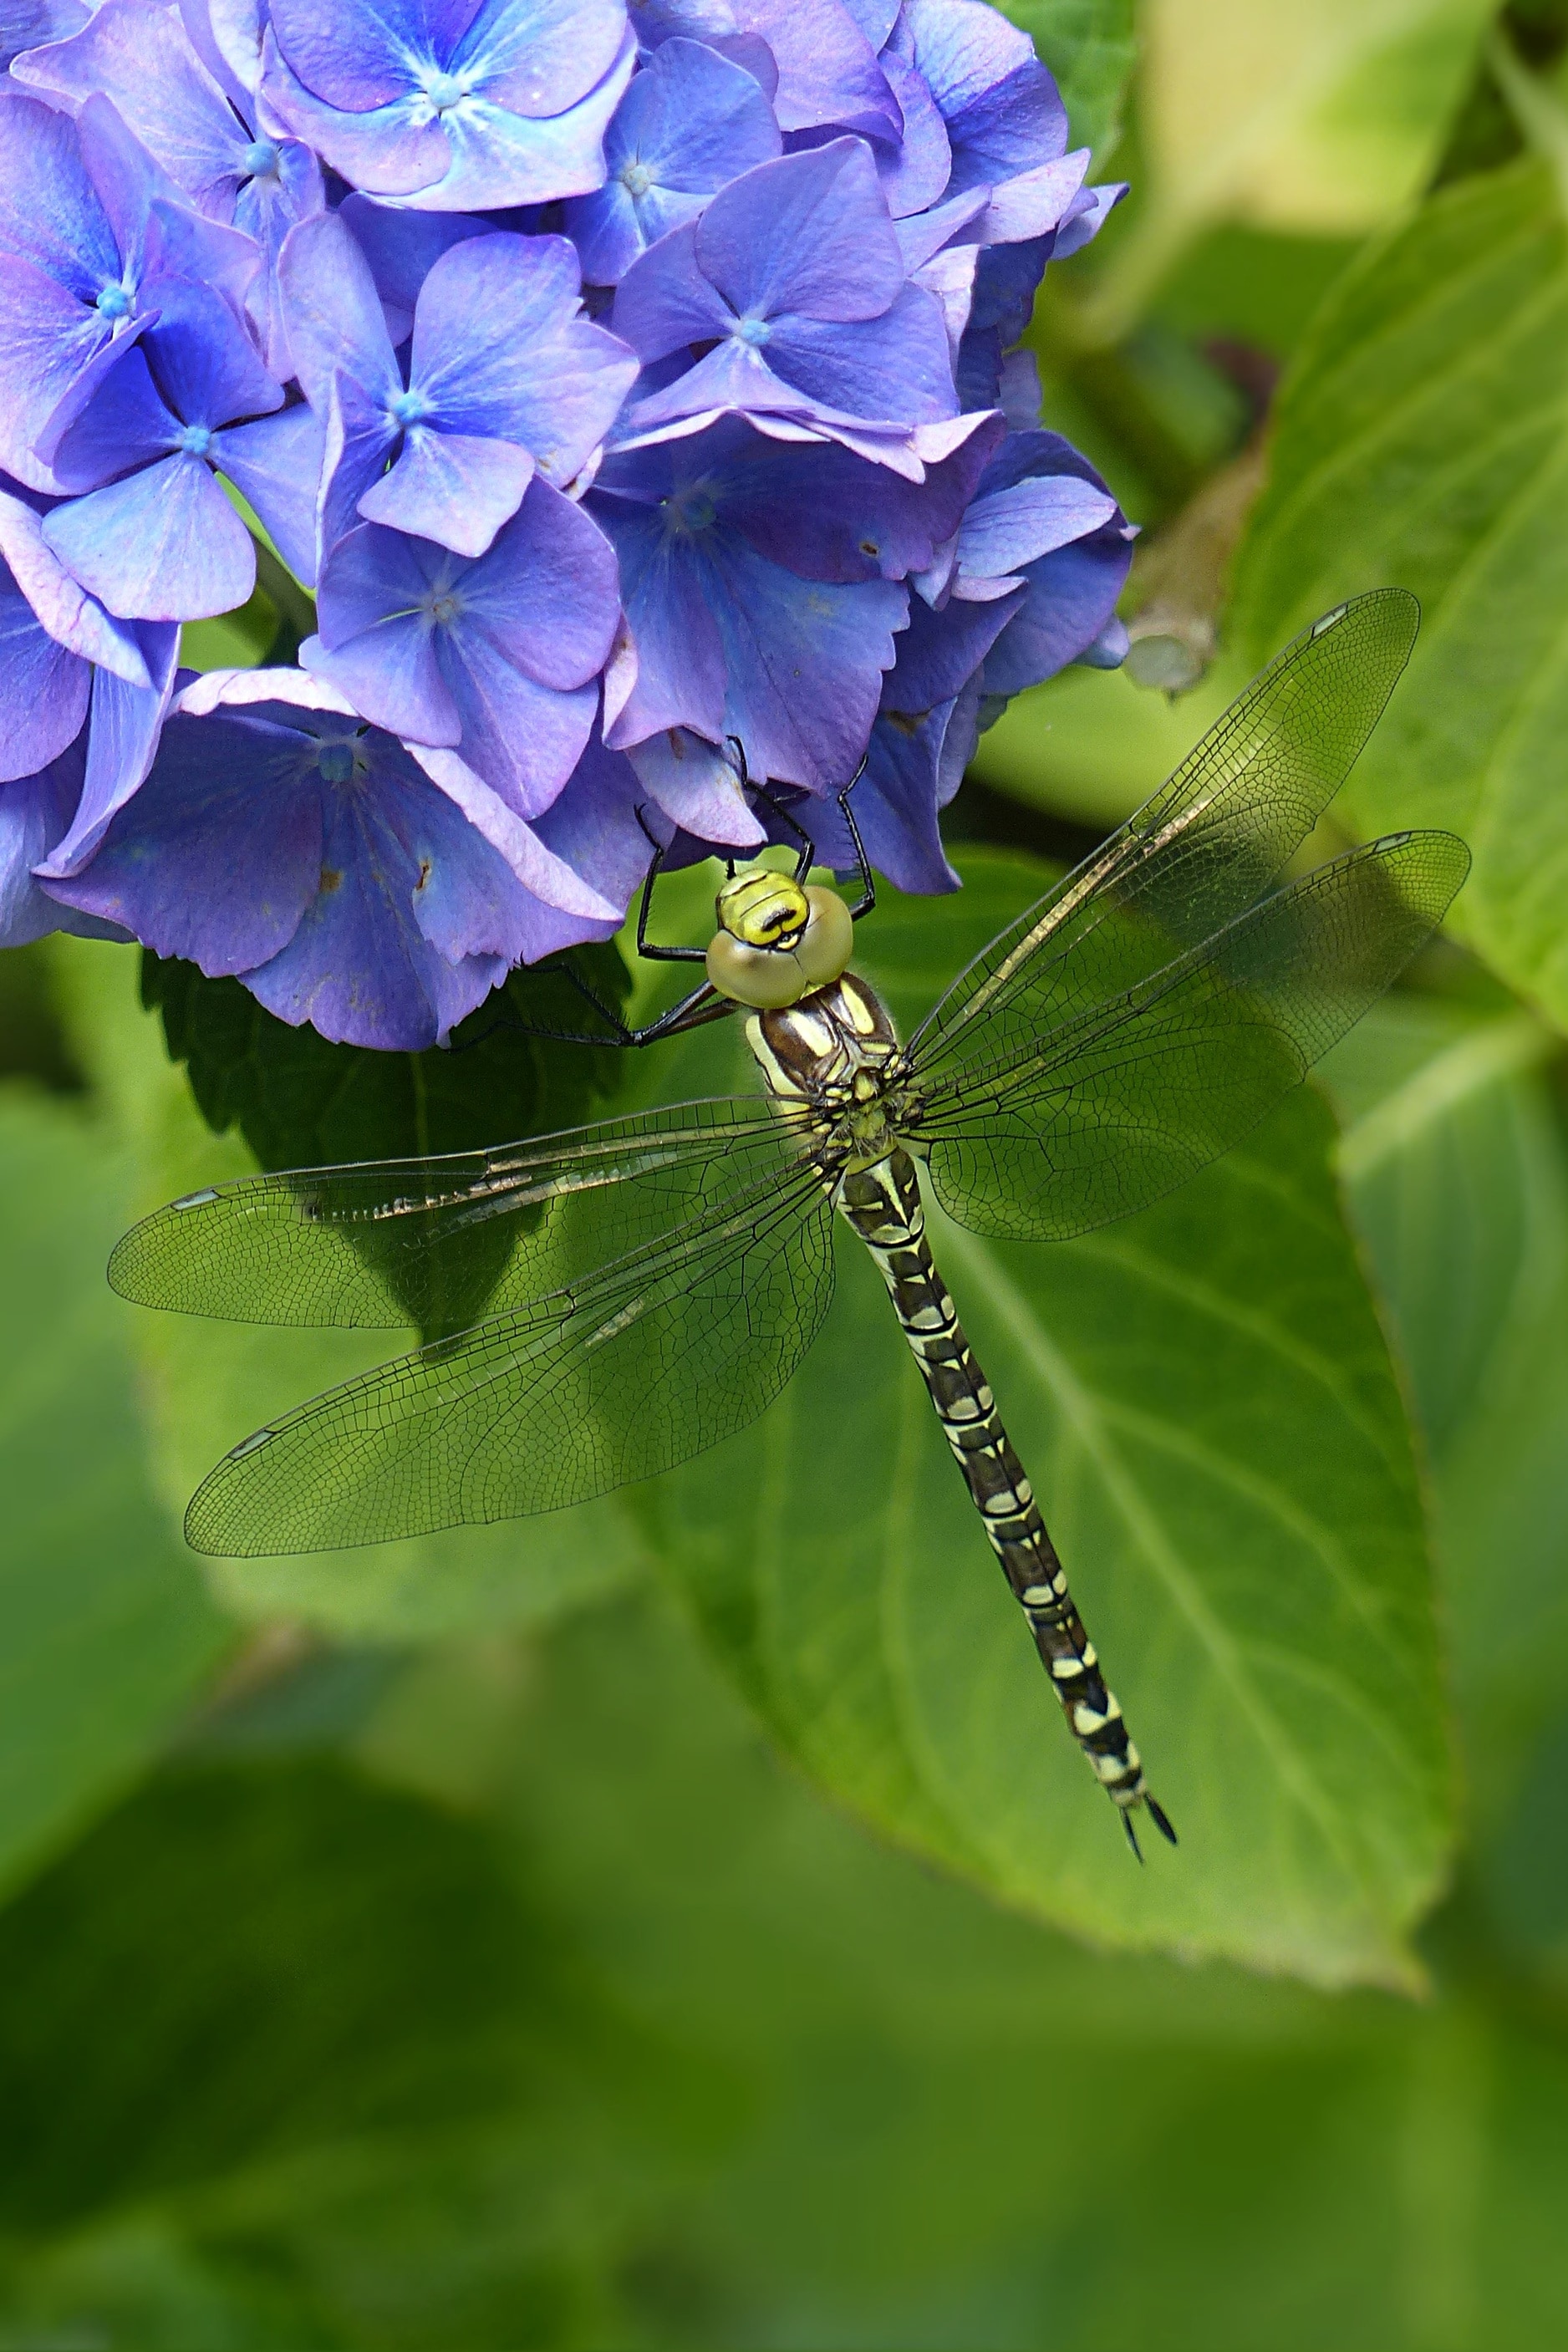 Insect, Animal, Odonata, Dragonfly, leaf, insect